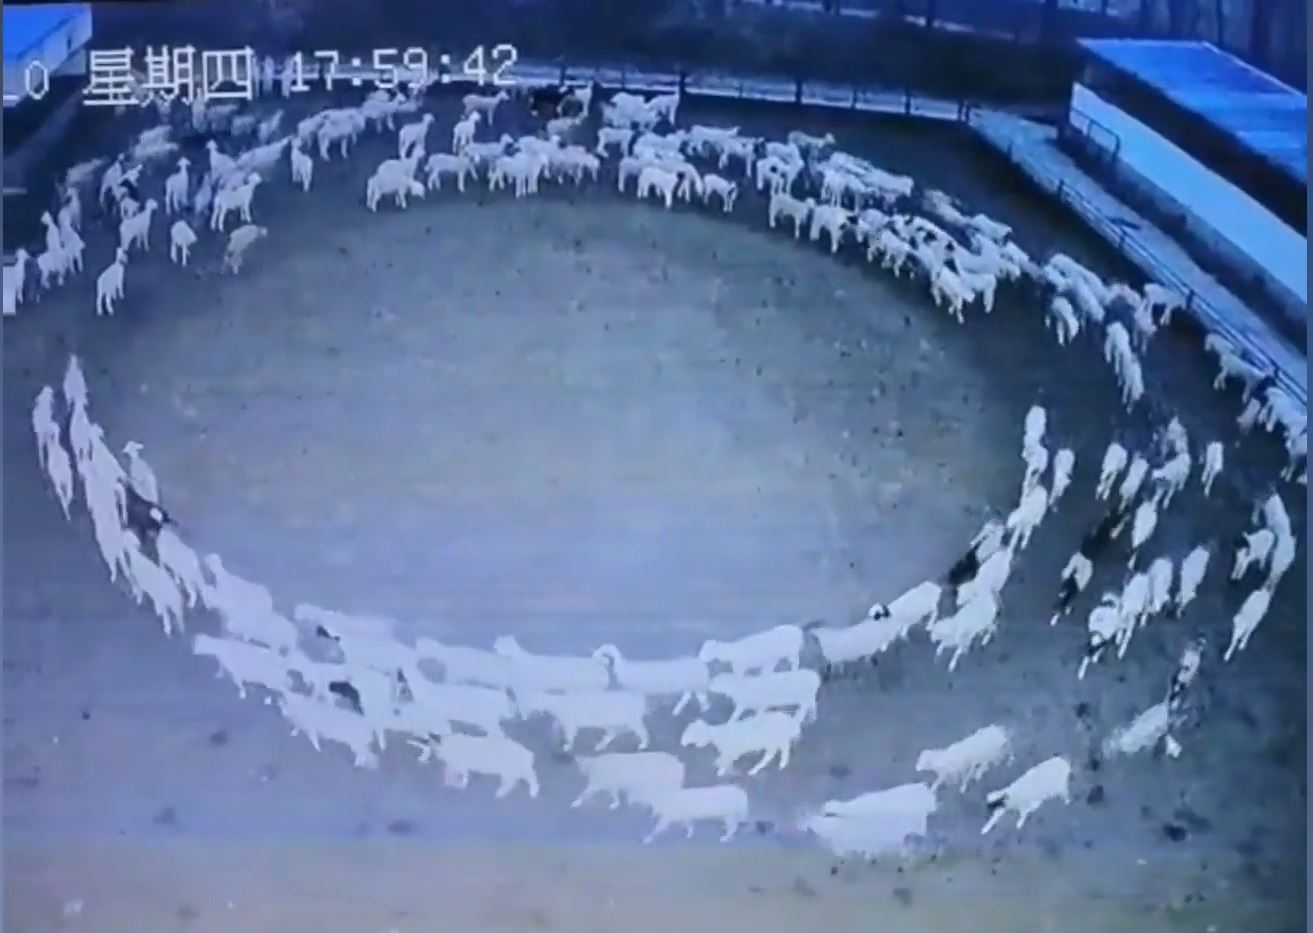 A flock of sheep circled around for 12 days and nights as if hypnotized 5